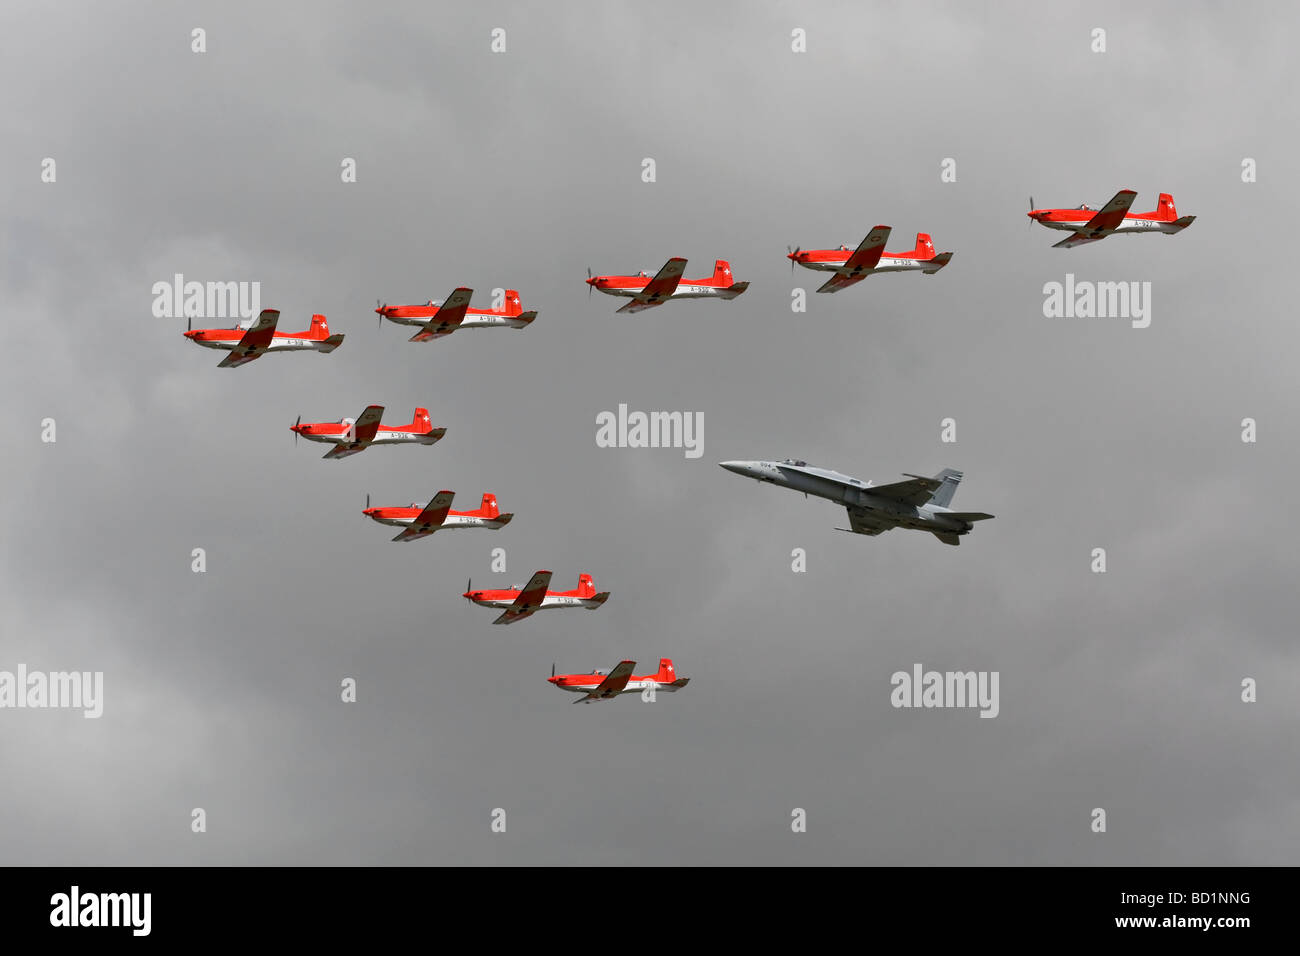 A close formation of Swiss air force Pilatus PC7 training aircraft along with an F18 Hornet Stock Photo